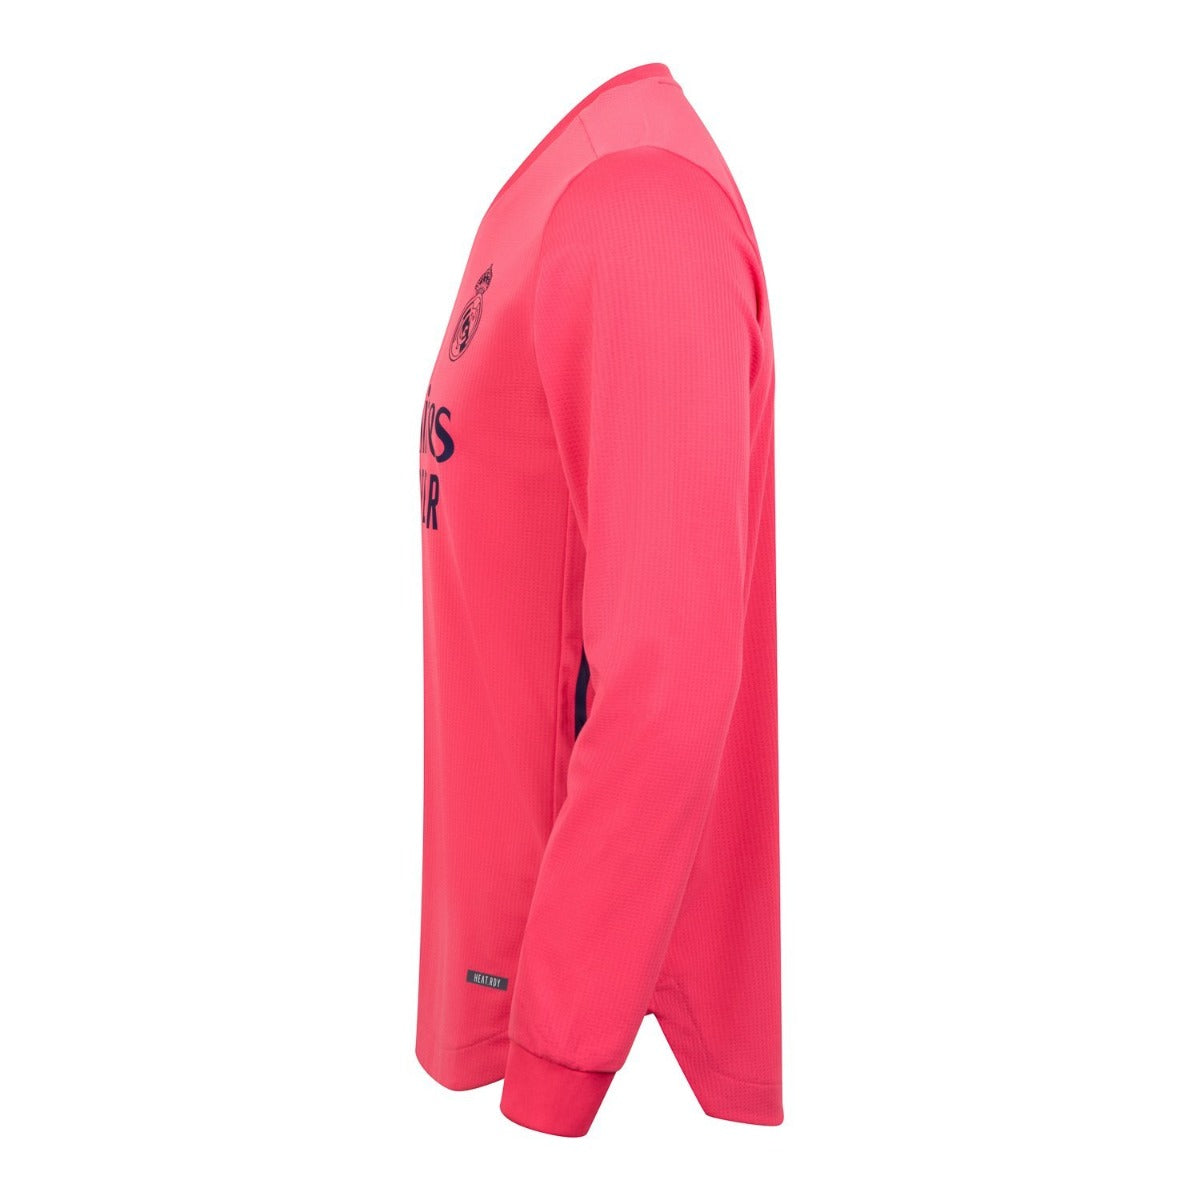 Adidas 2020-21 Real Madrid Authentic LS Away Jersey - Pink-Navy